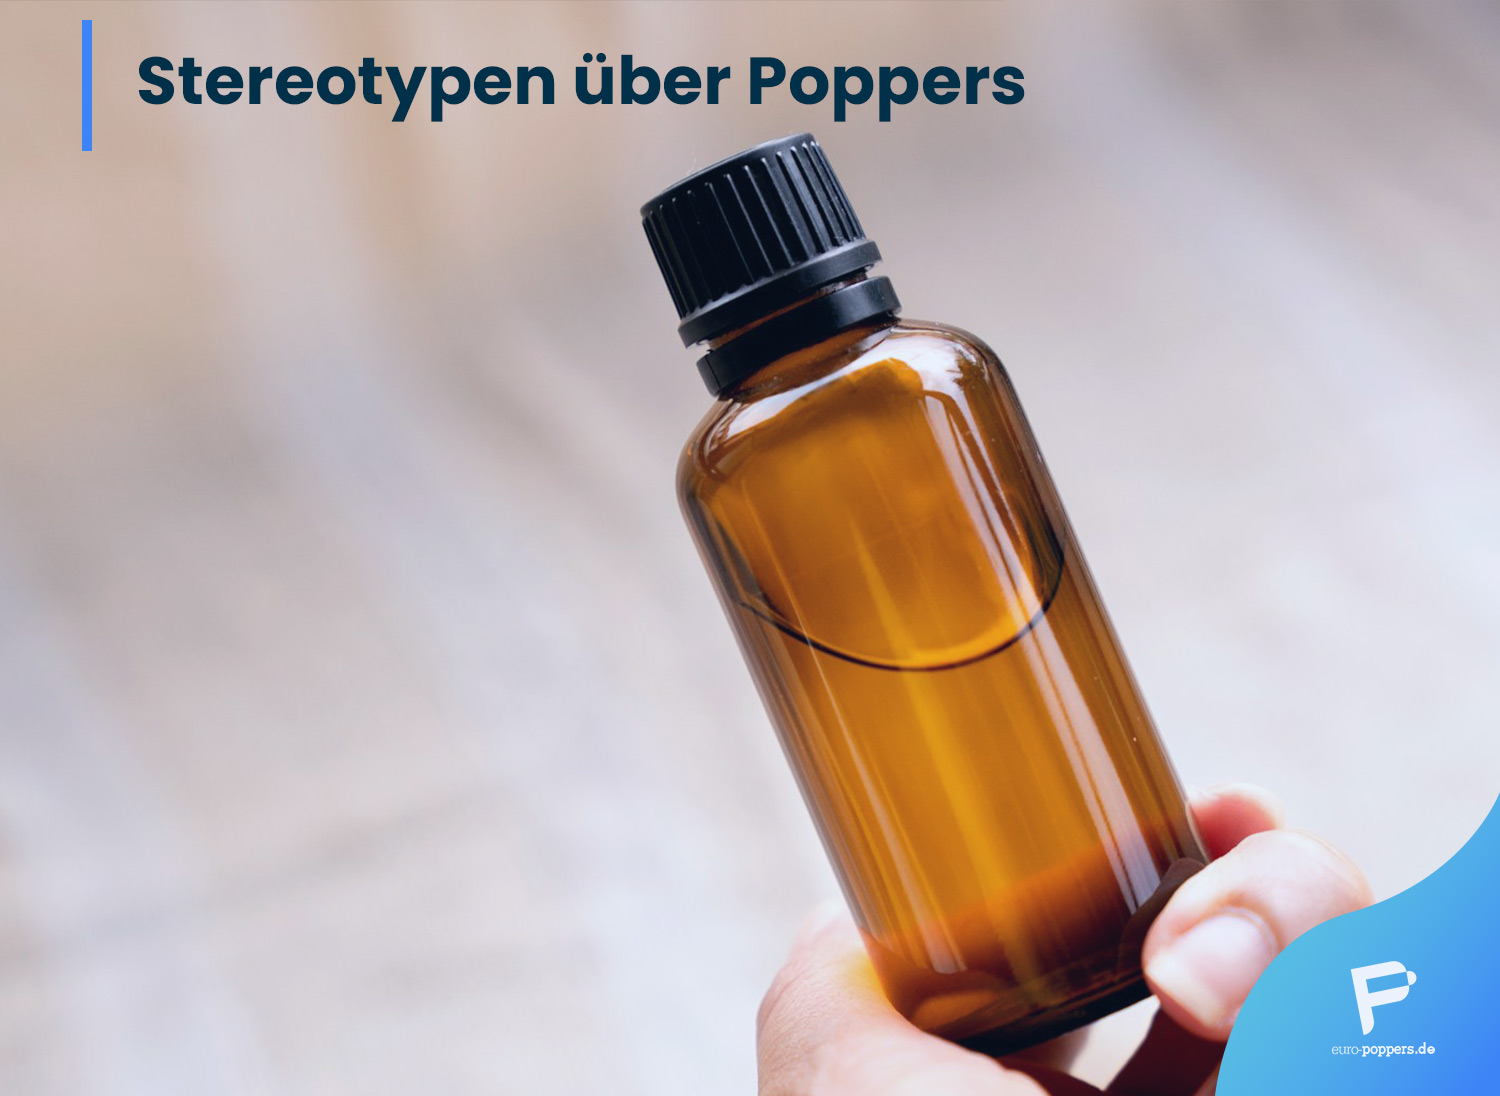 Read more about the article Stereotypen über Poppers